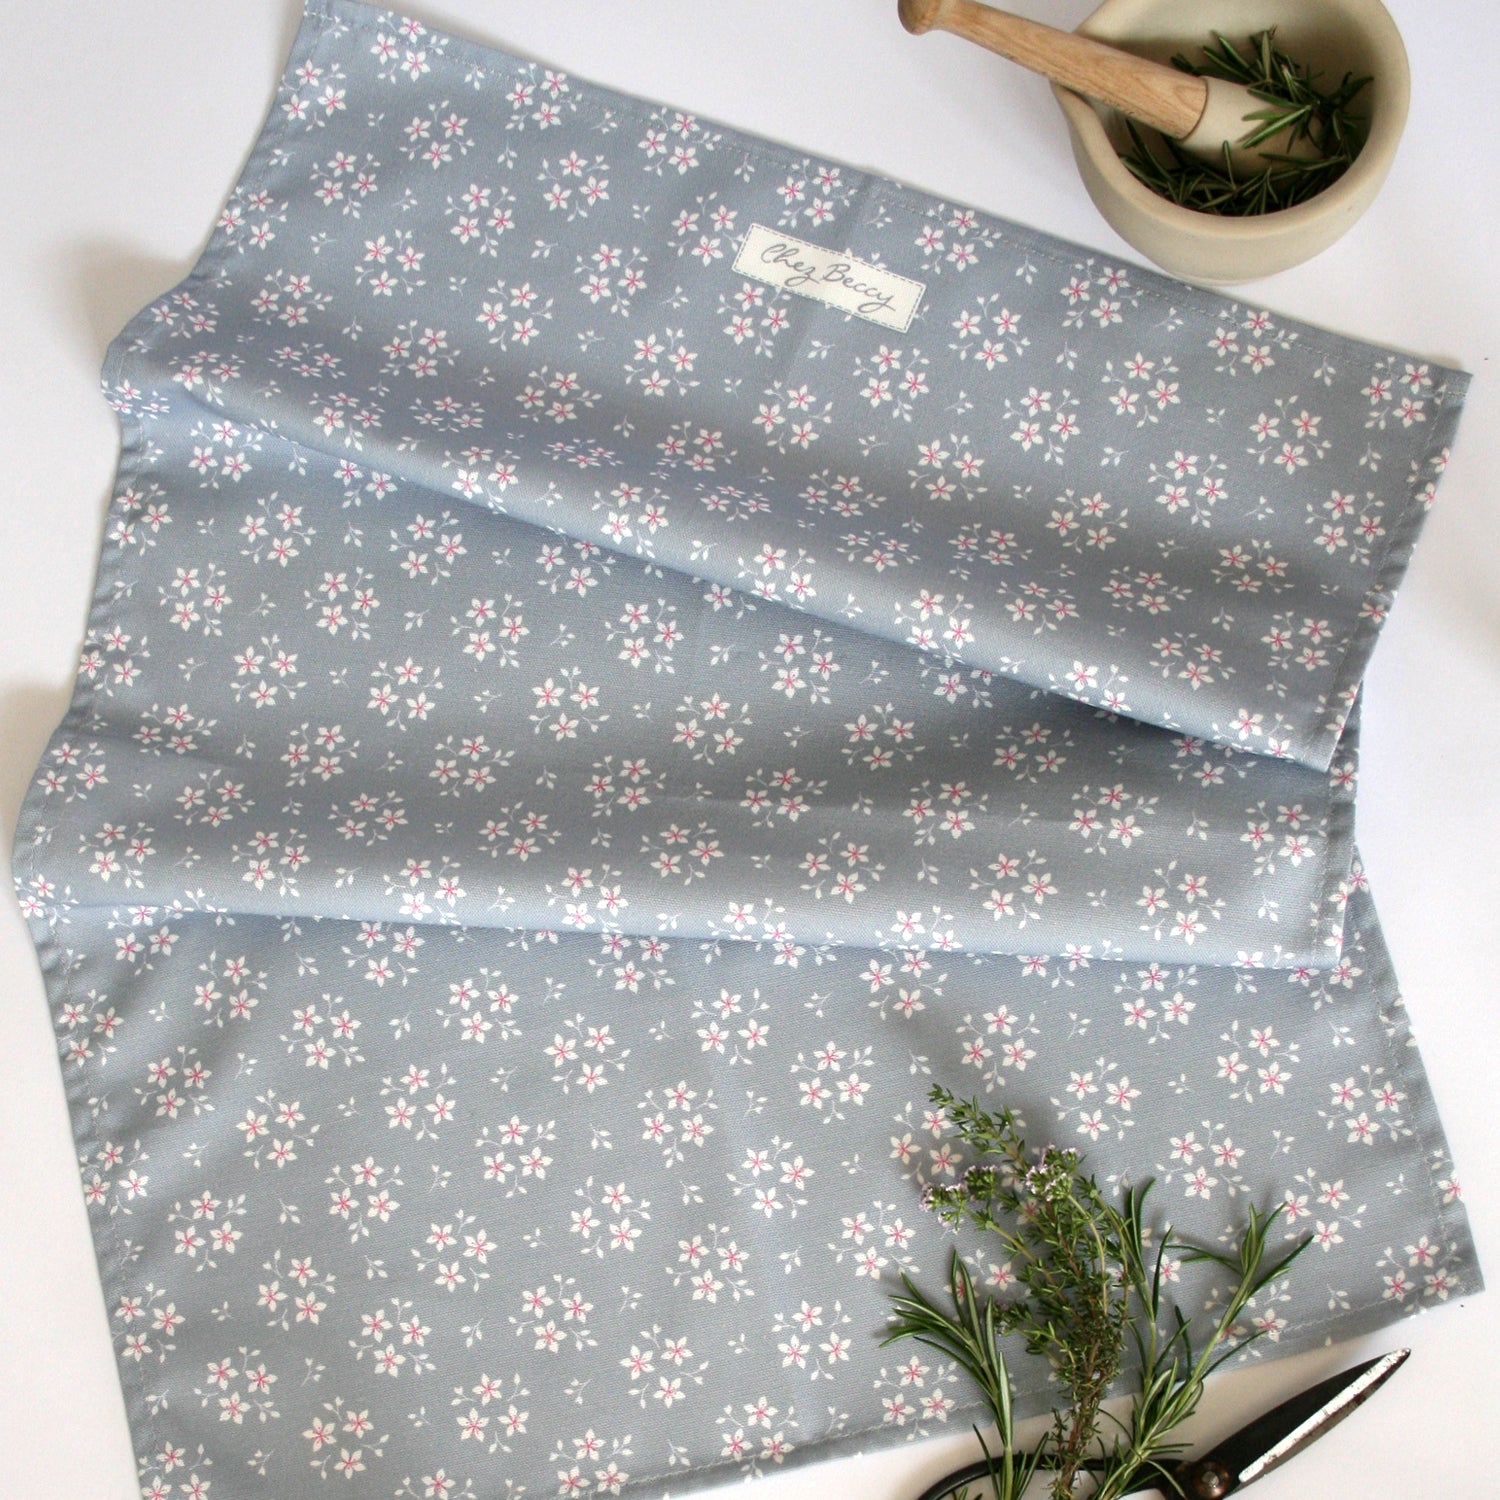 Grey tea towel with little white flowers